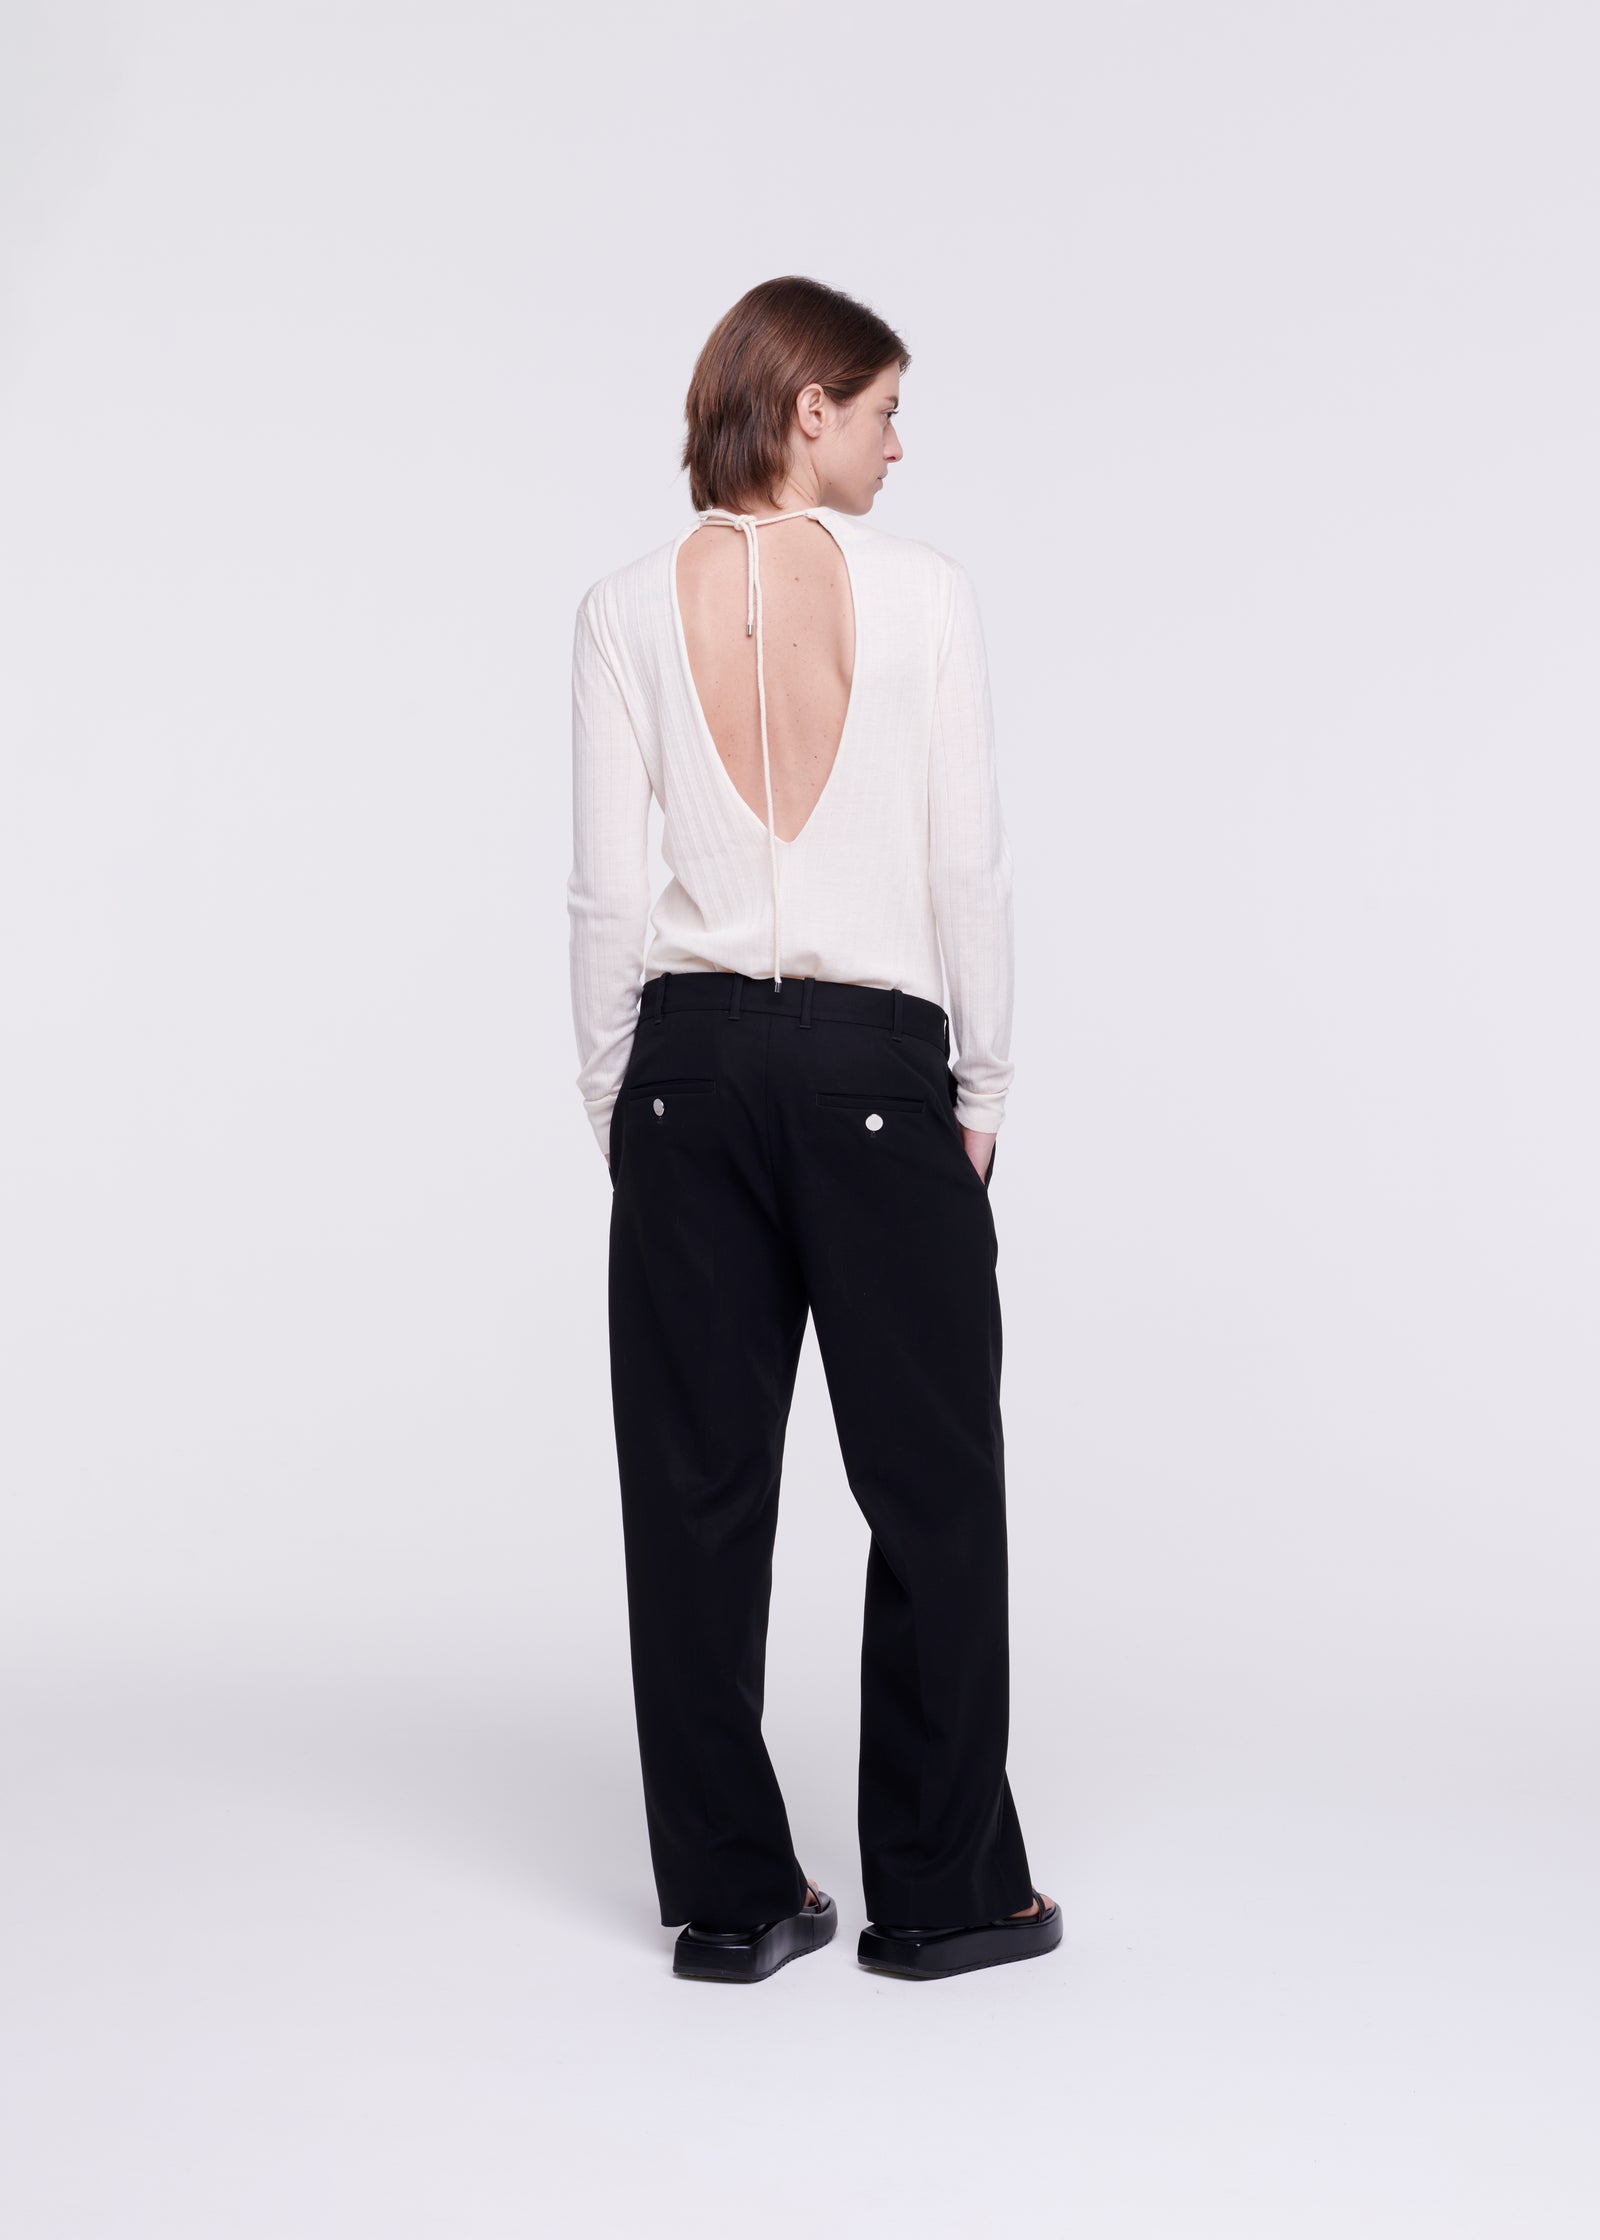 BLACK FLARED PANTS IN CREPE COTTON